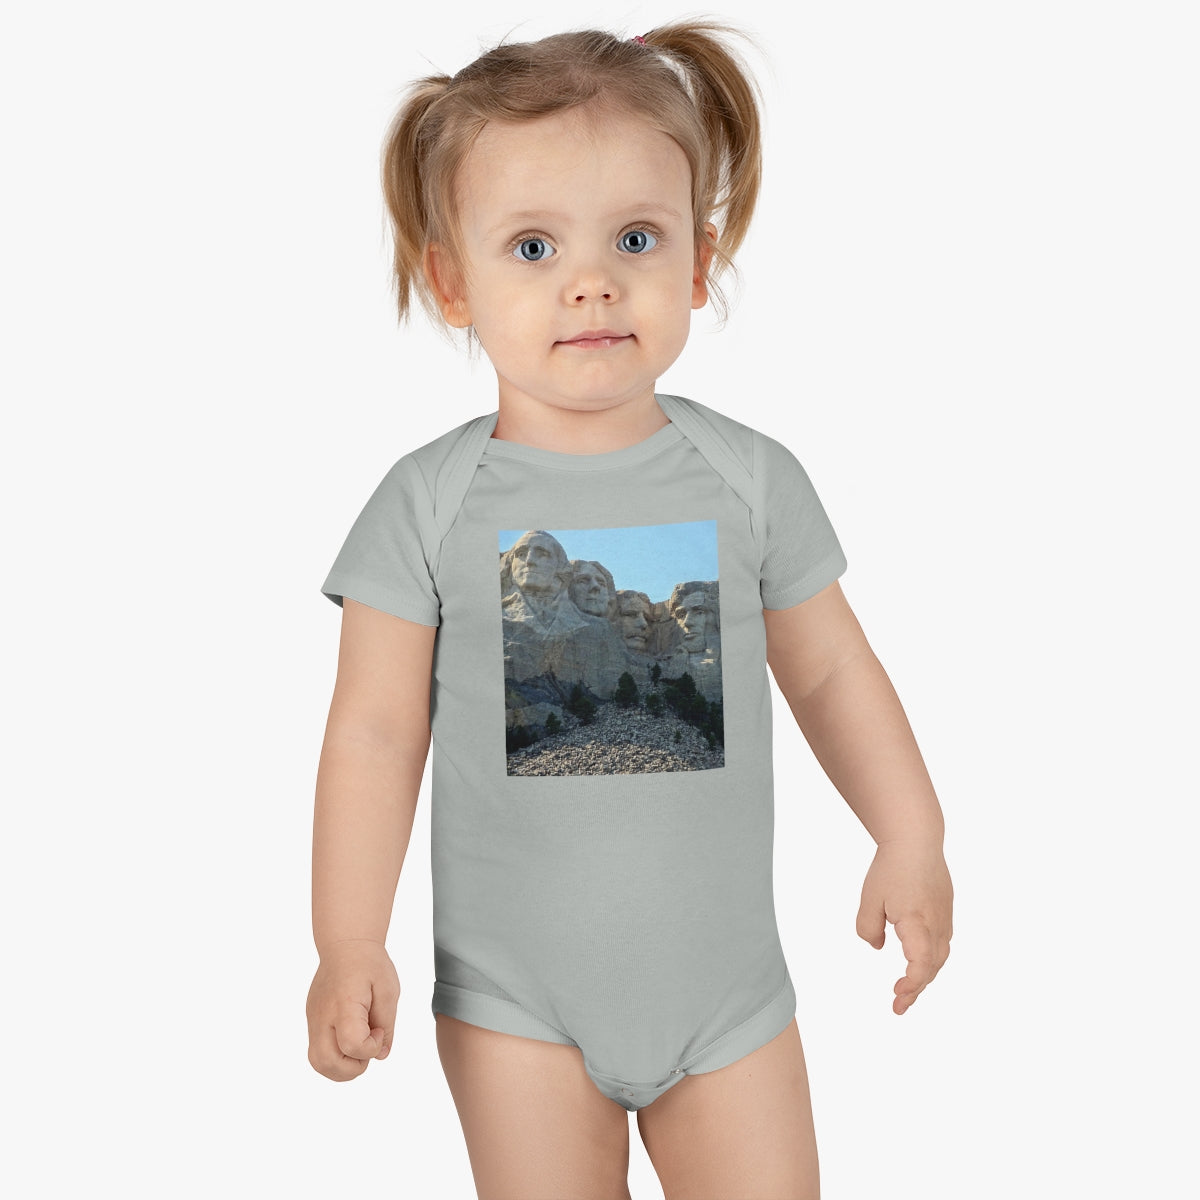 History Remembered Forever - Baby Short Sleeve Onesie - Fry1Productions